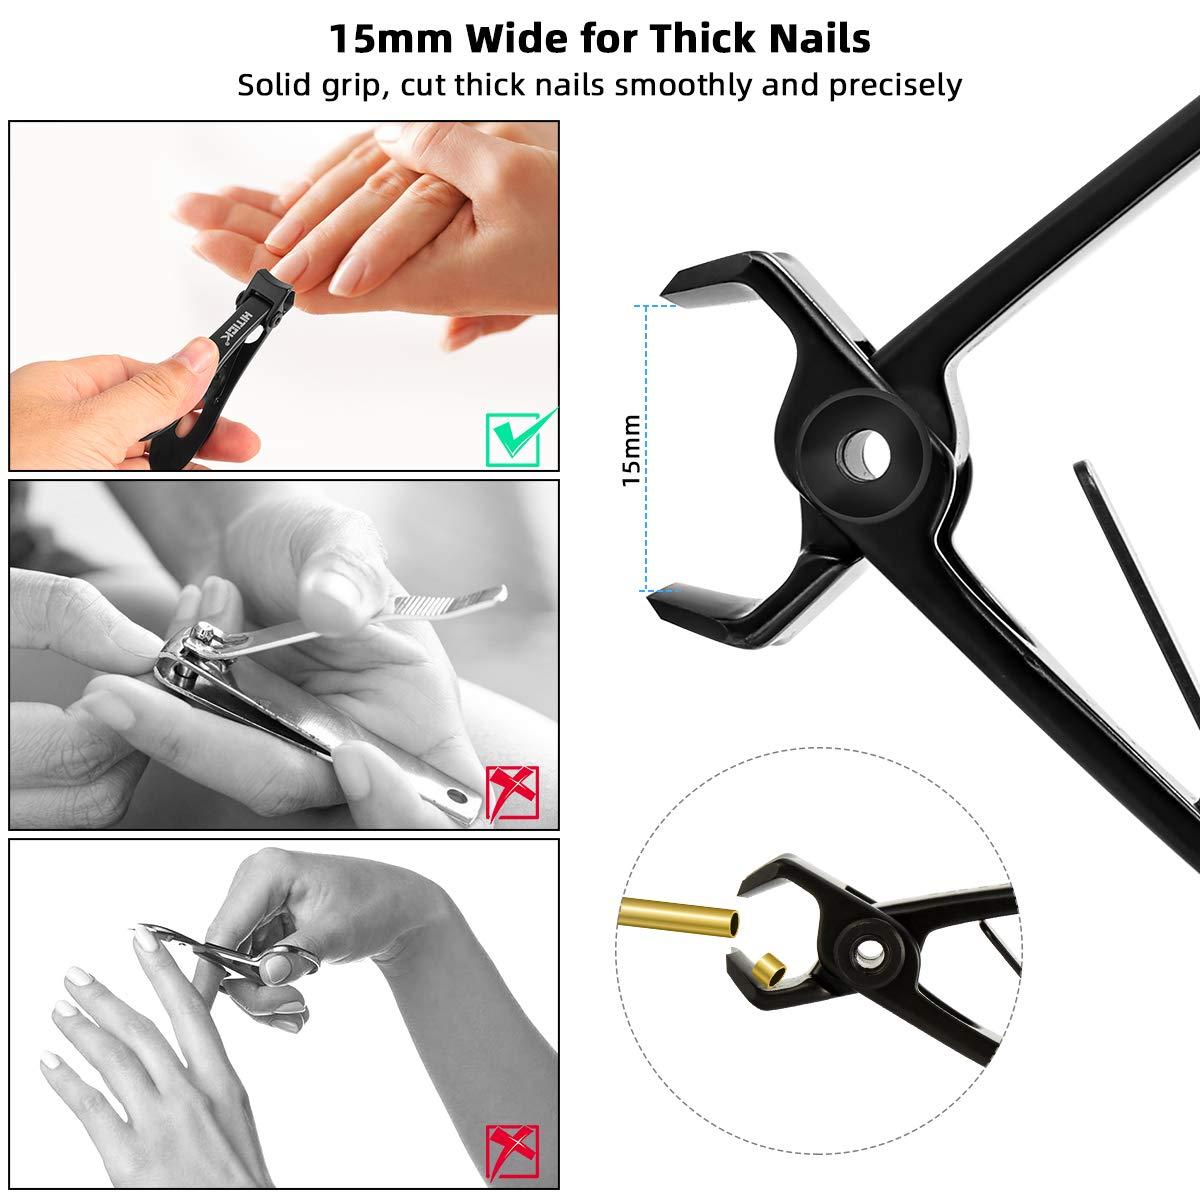 Nail Clippers For Thick Nails Review 2020 —Best Toenail Clippers For thick  nail - YouTube